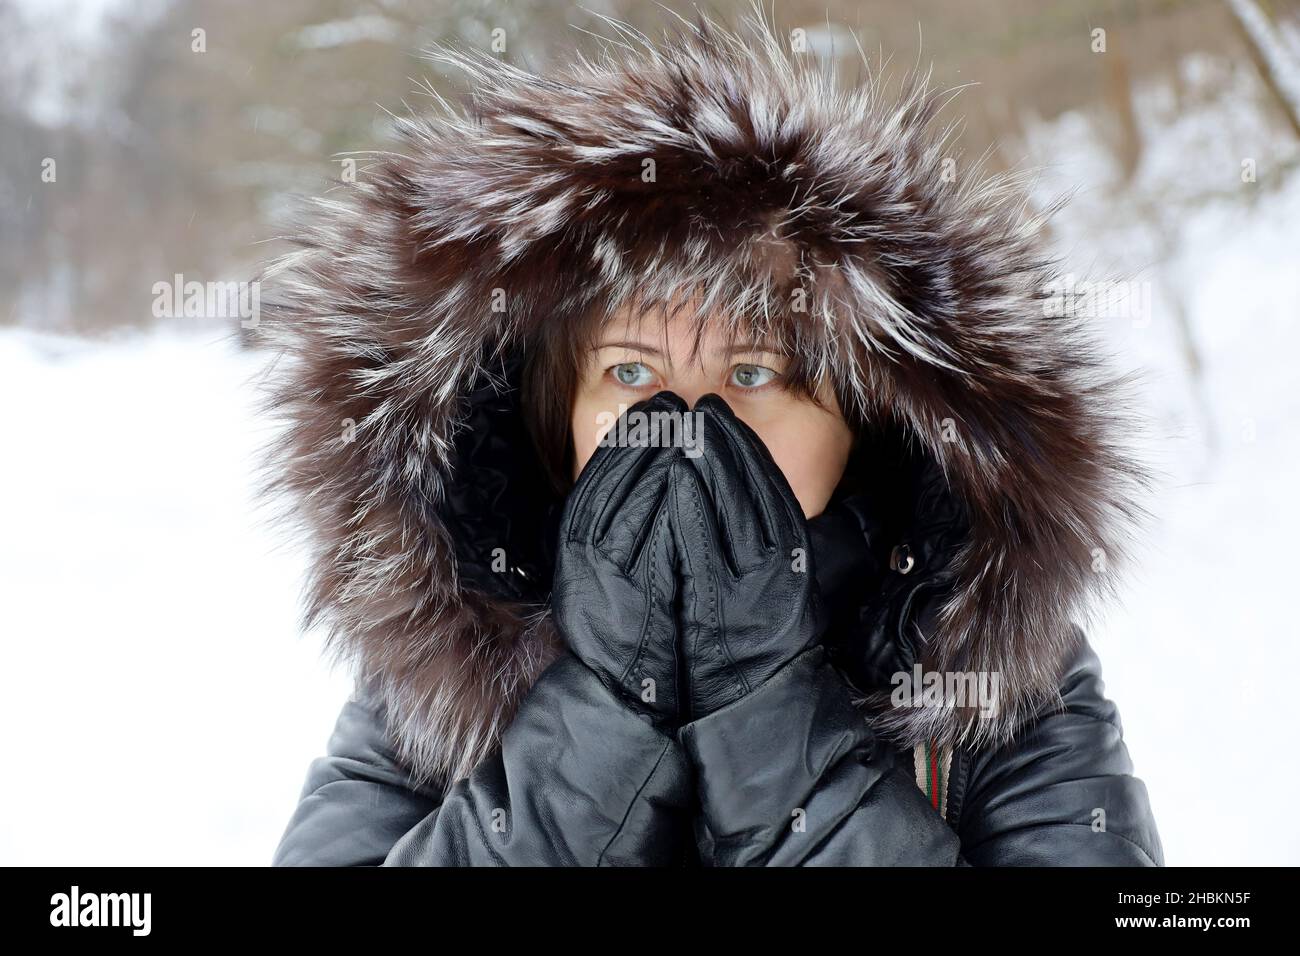 Frost weather in winter, woman in leather coat with fur hood standing on a street during snow and covering her face by hands in gloves Stock Photo